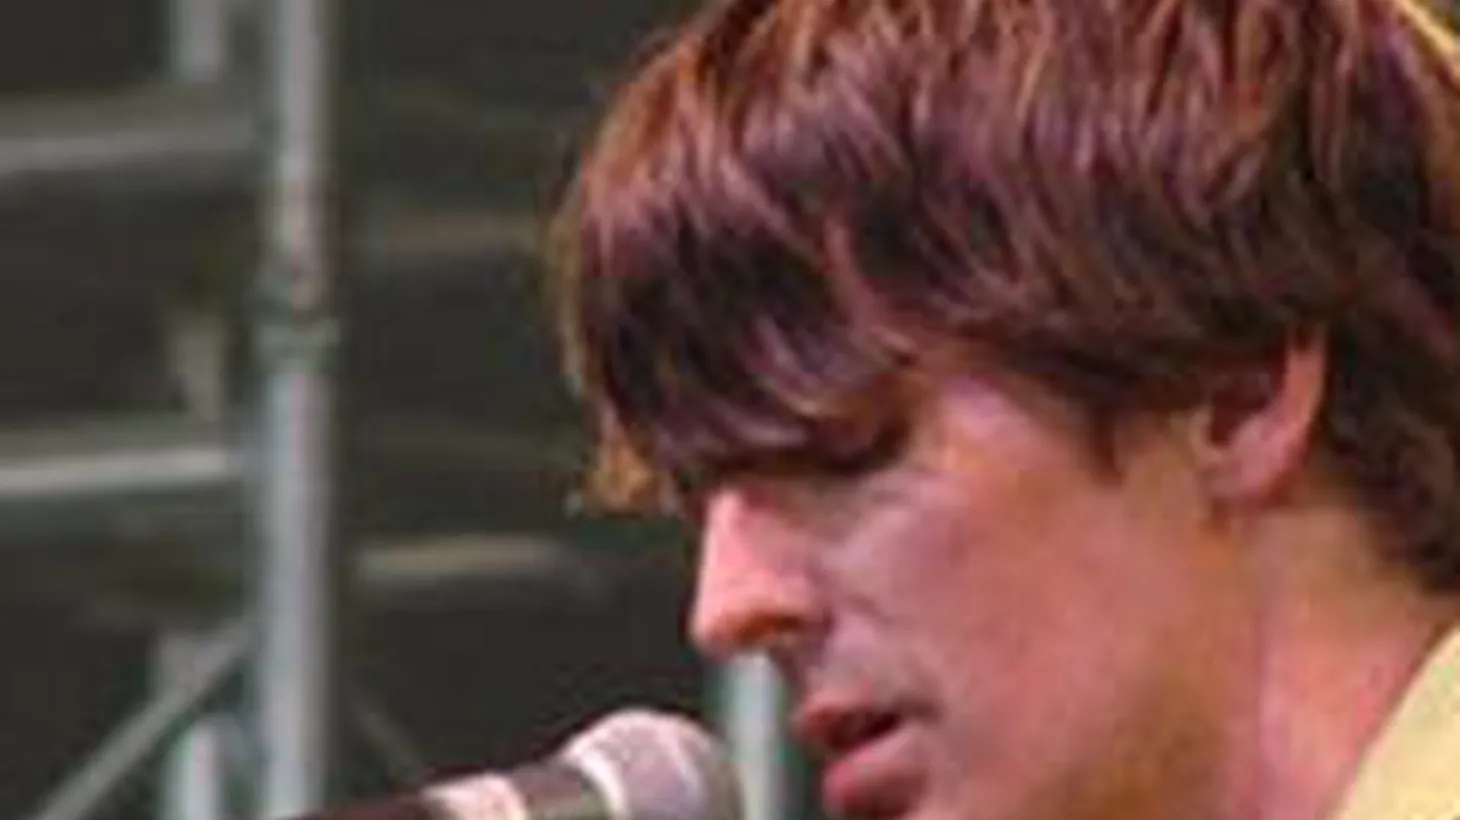 Pavement founder, Stephen Malkmus, performs solo and acoustic on Morning Becomes Eclectic at 11:15am. Click Here to Watch!